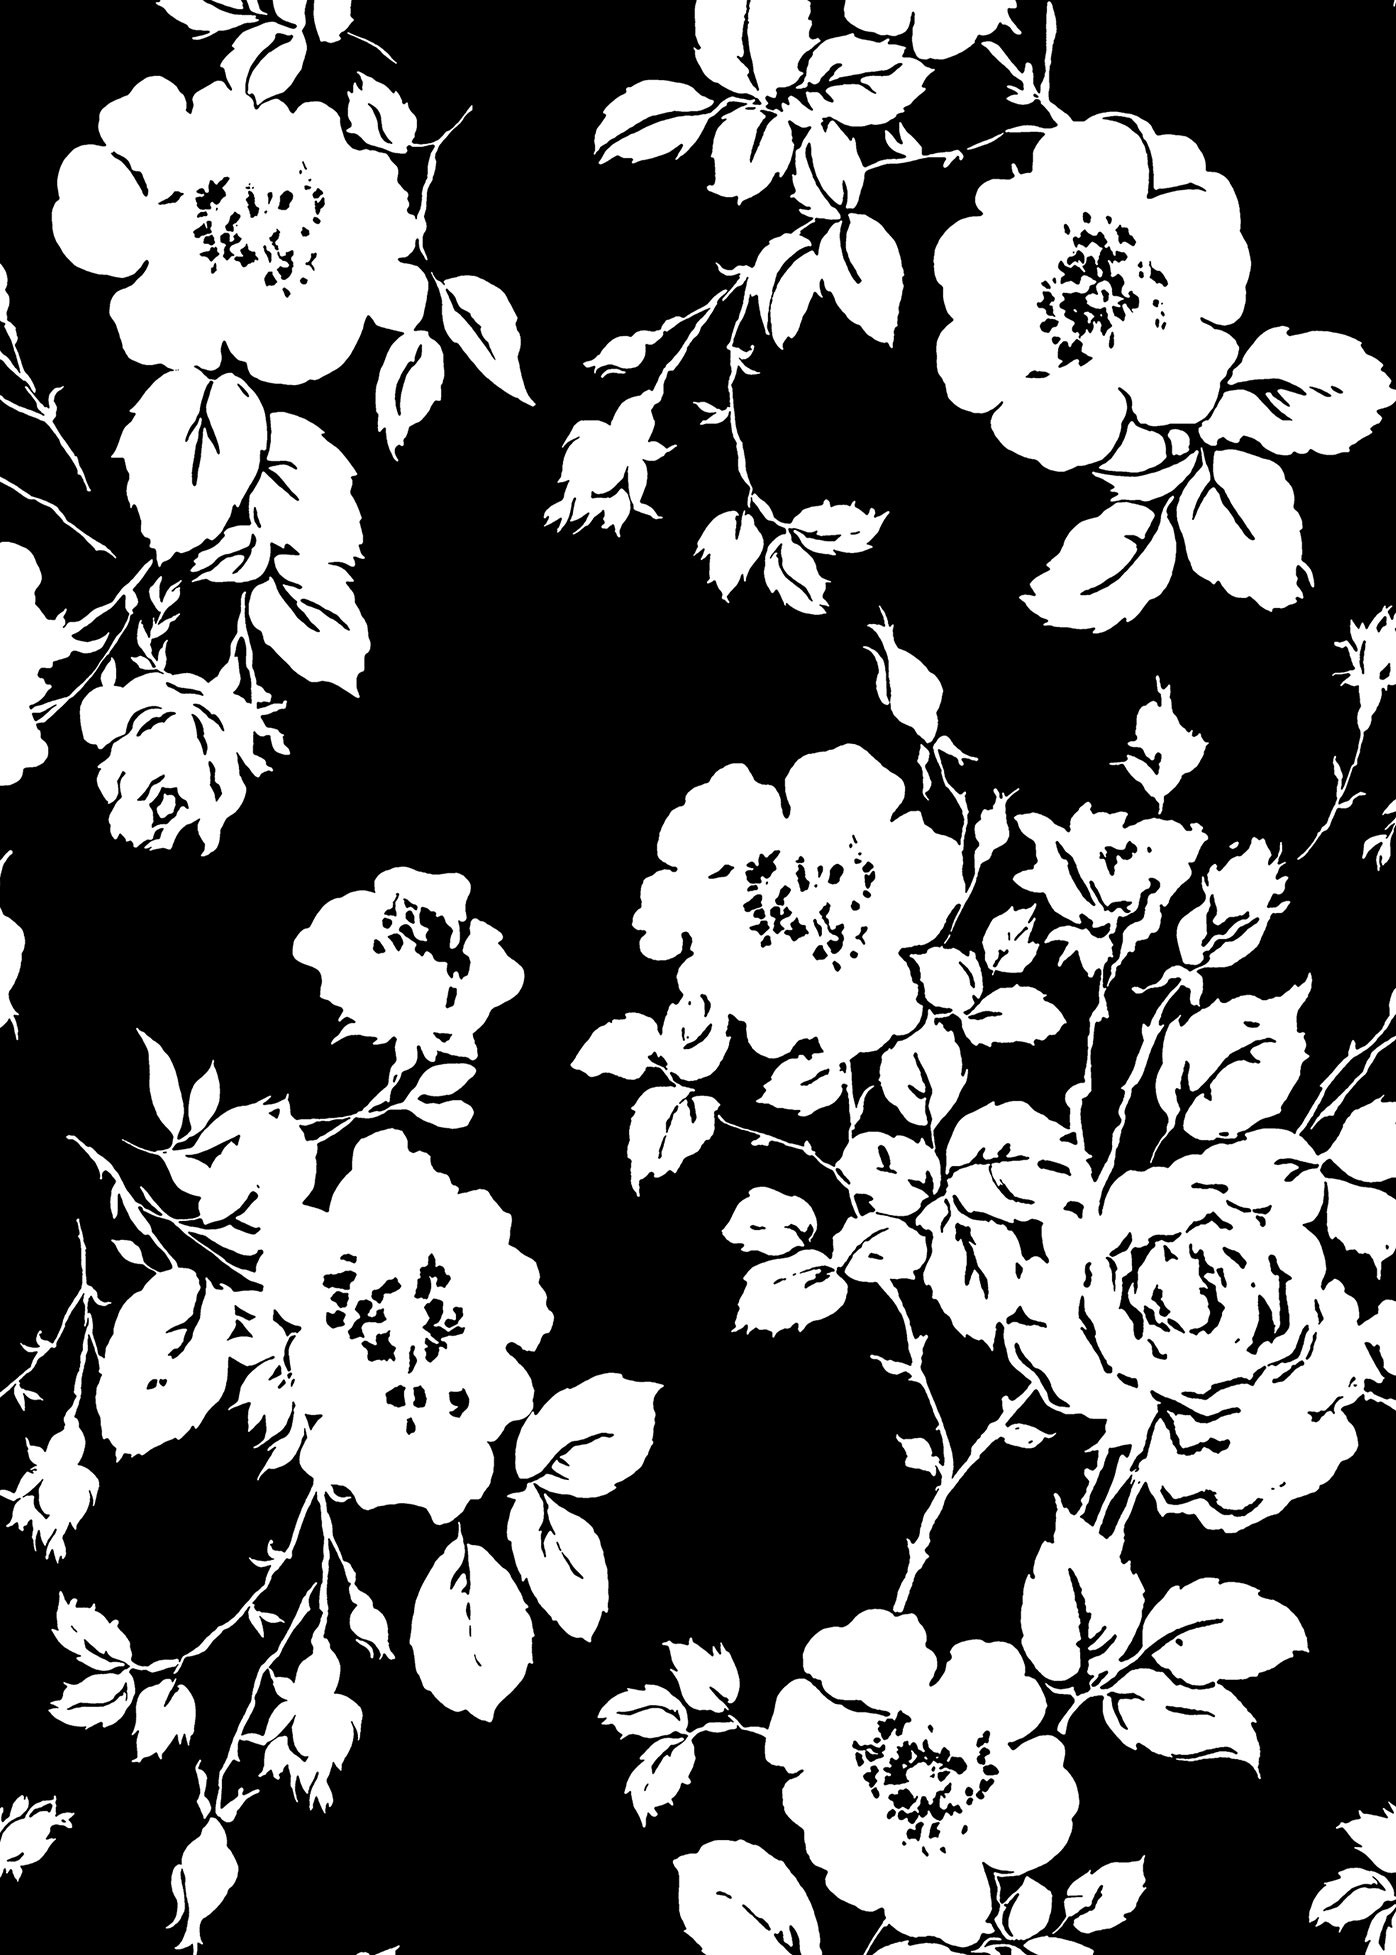 Dolce Amp Gabbana Women 039 S Clothing Collection Winter 2022 Floral Darkfloral Surfacedesign 1396x1955